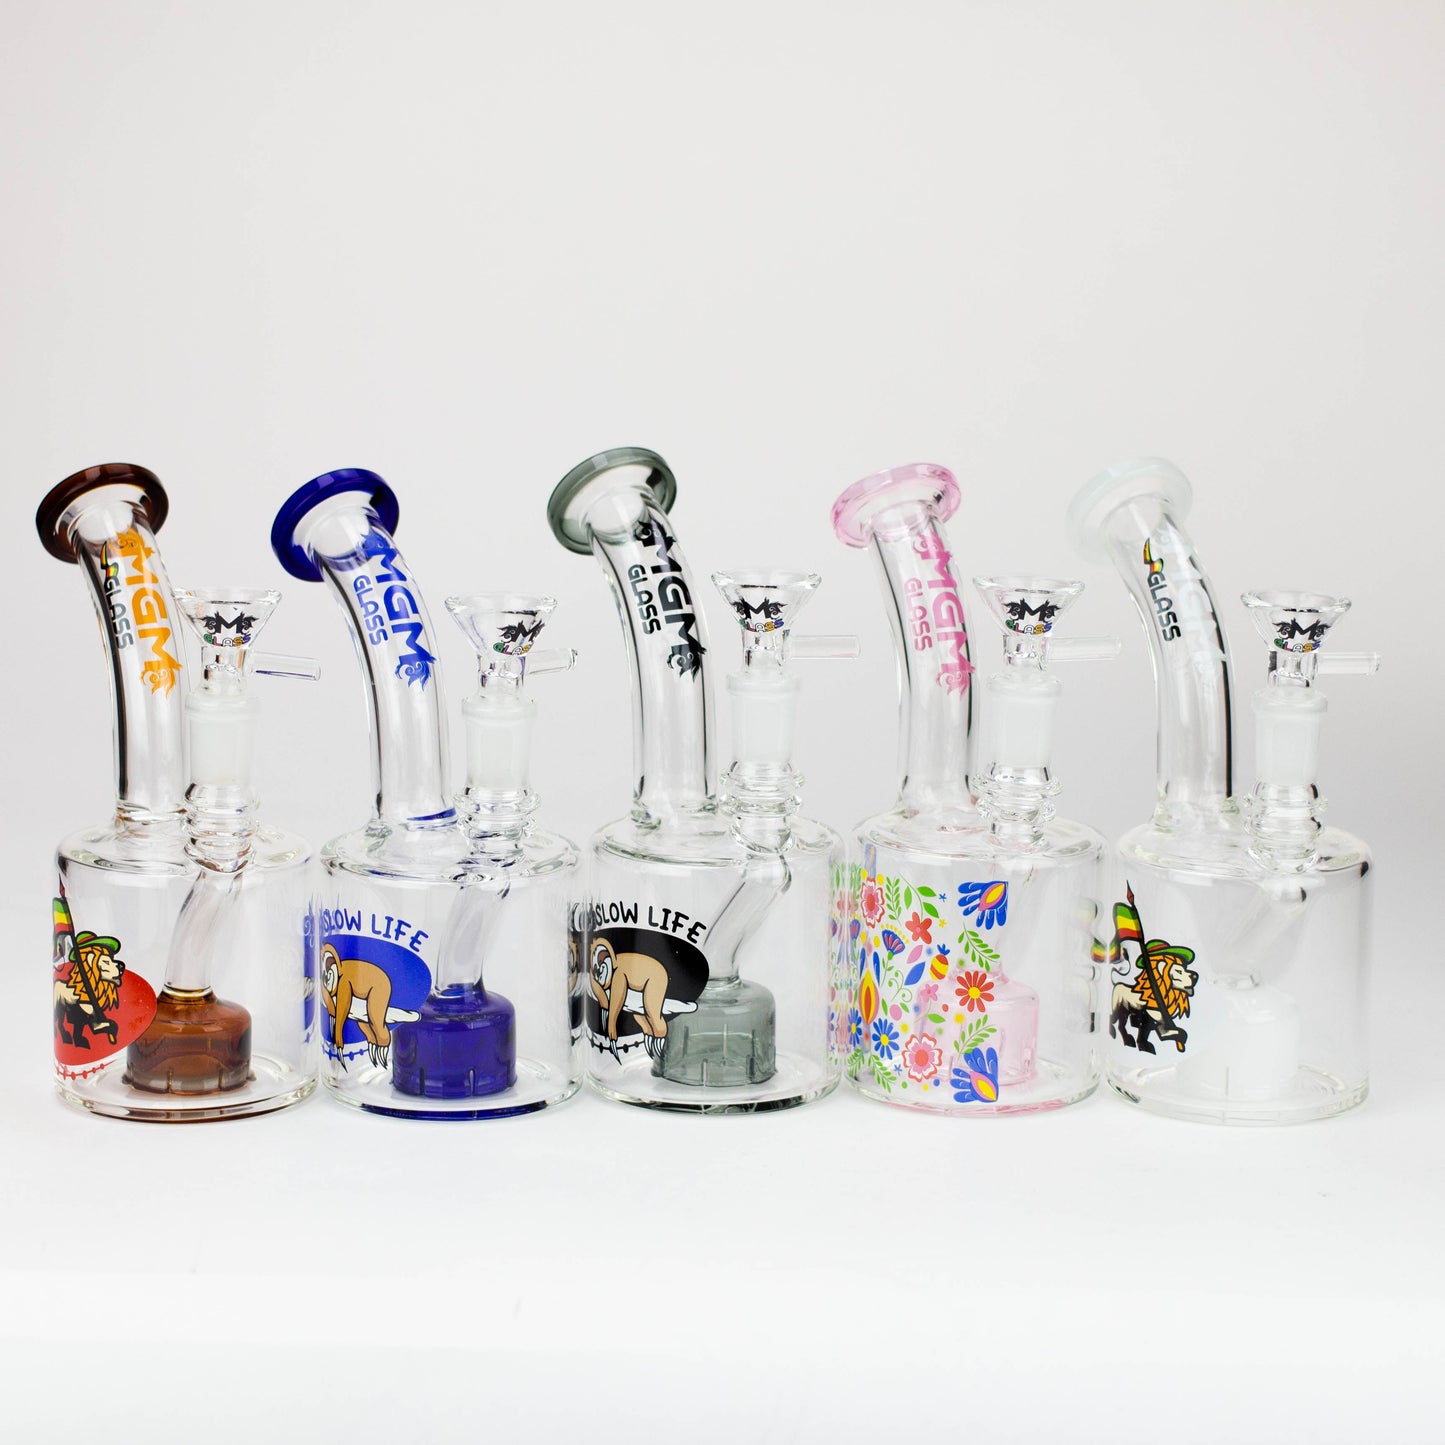 6.7" MGM Glass 2-in-1 bubbler with graphic [C2675]_4